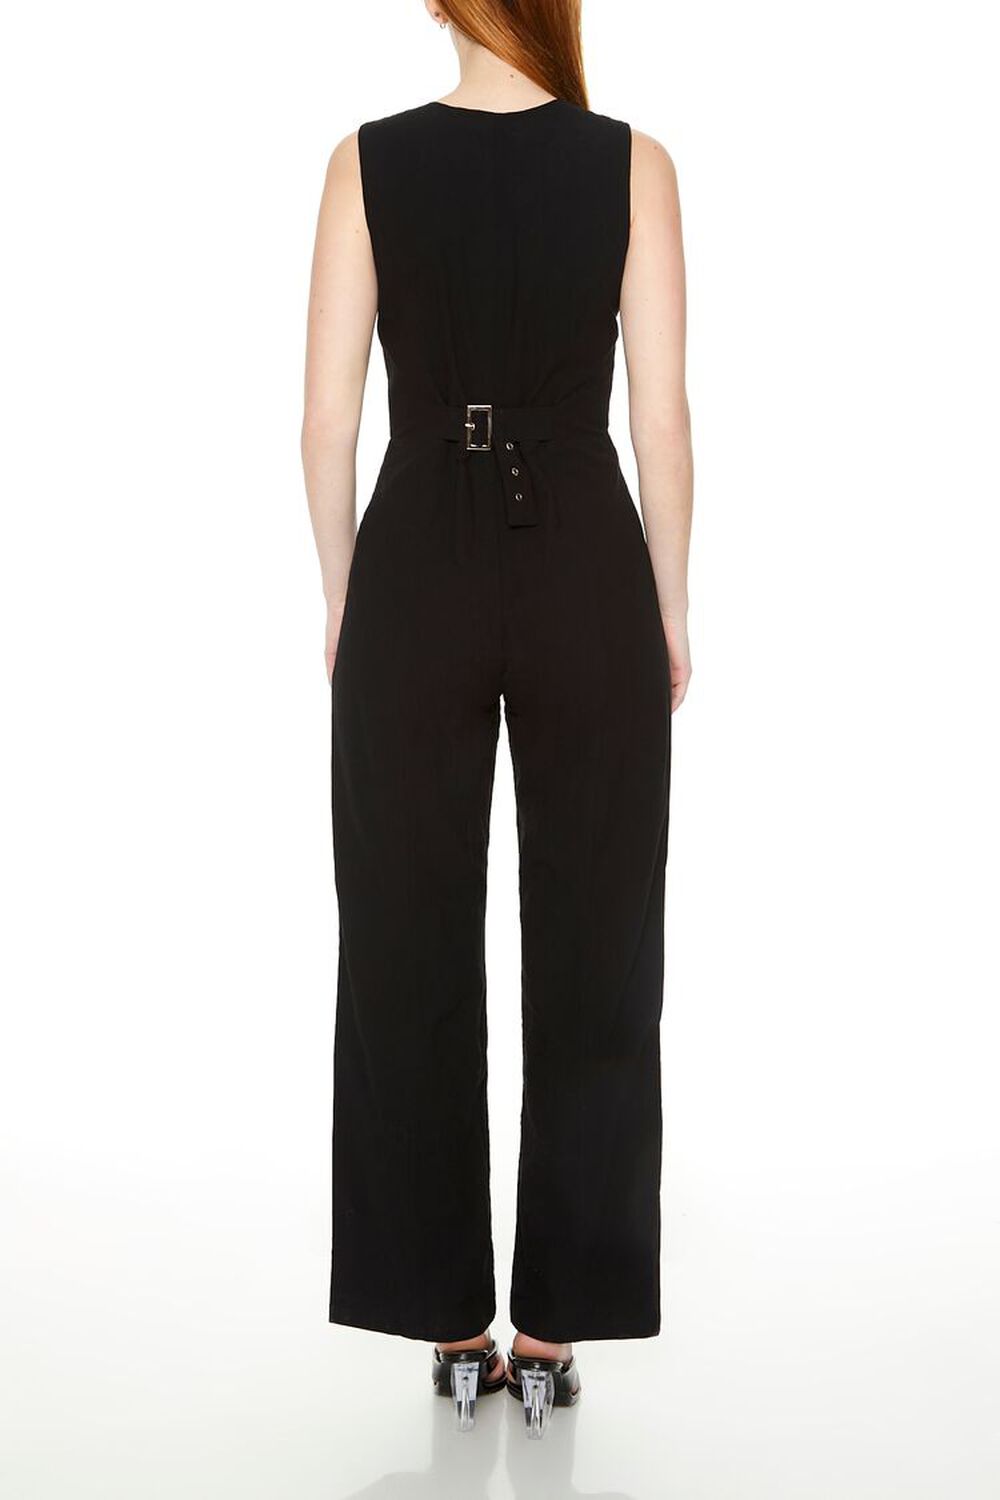 BLACK Sleeveless Button-Front Jumpsuit, image 3